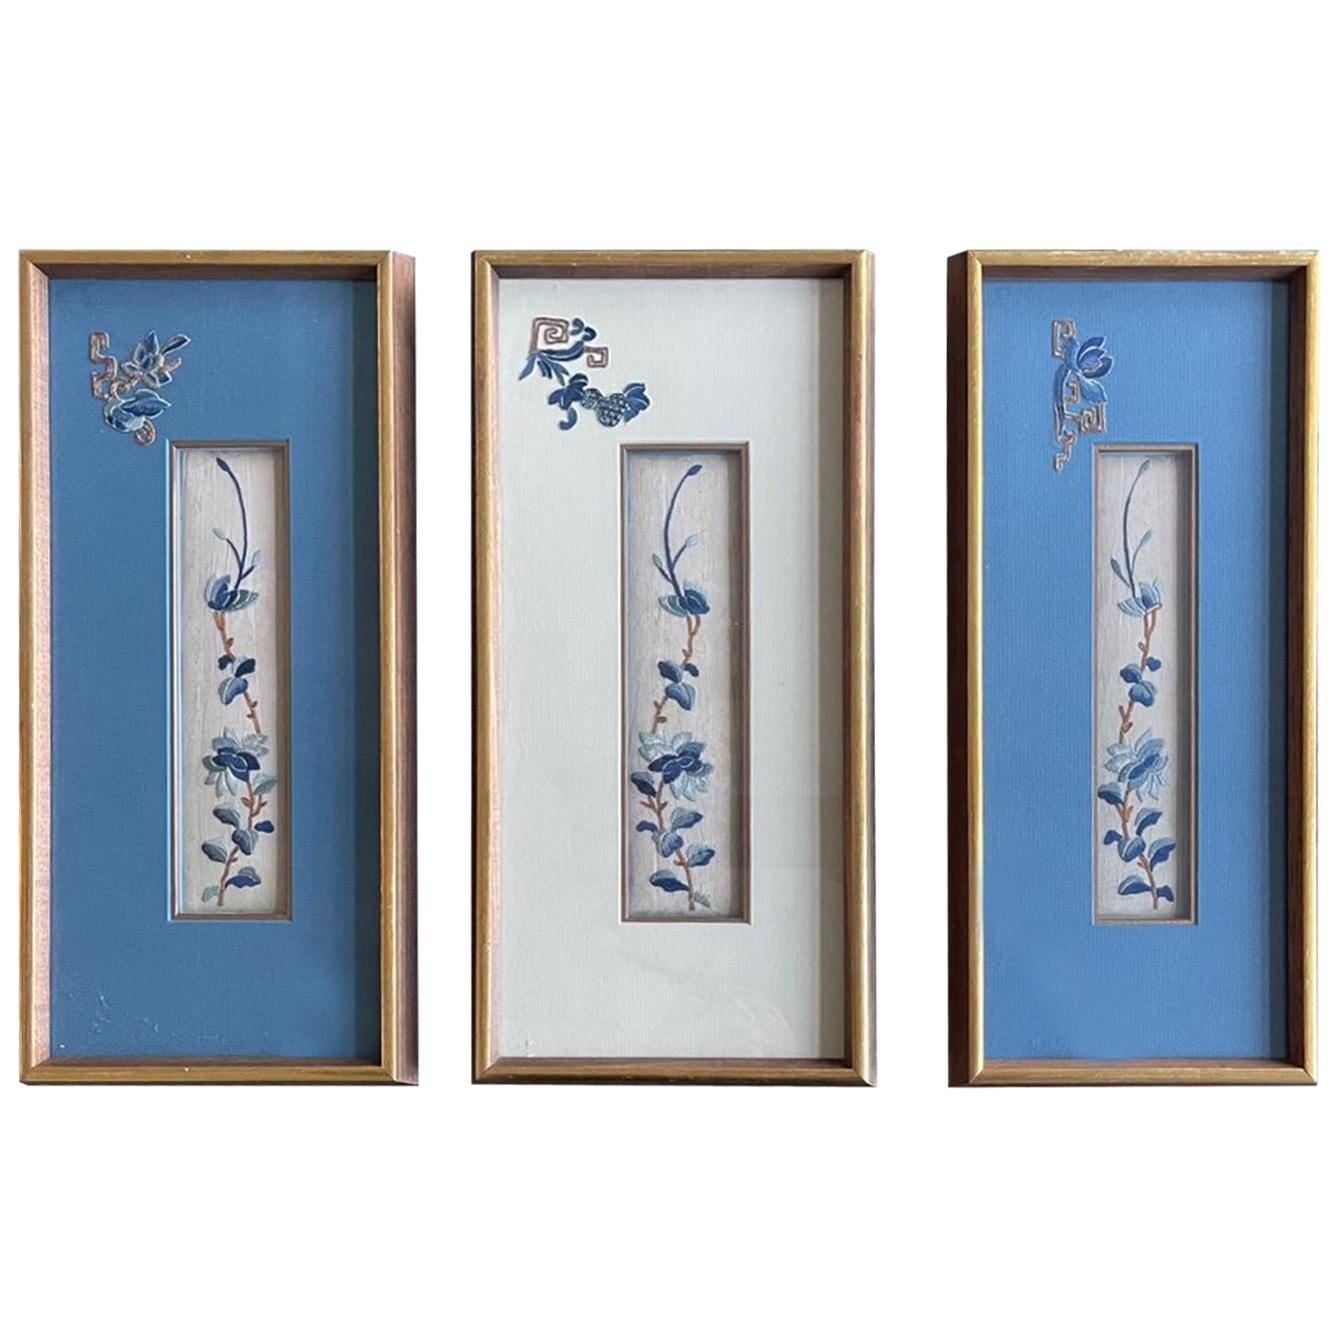 Set of Three-Framed Antique Chinese Textiles Qing Dynasty Provenance